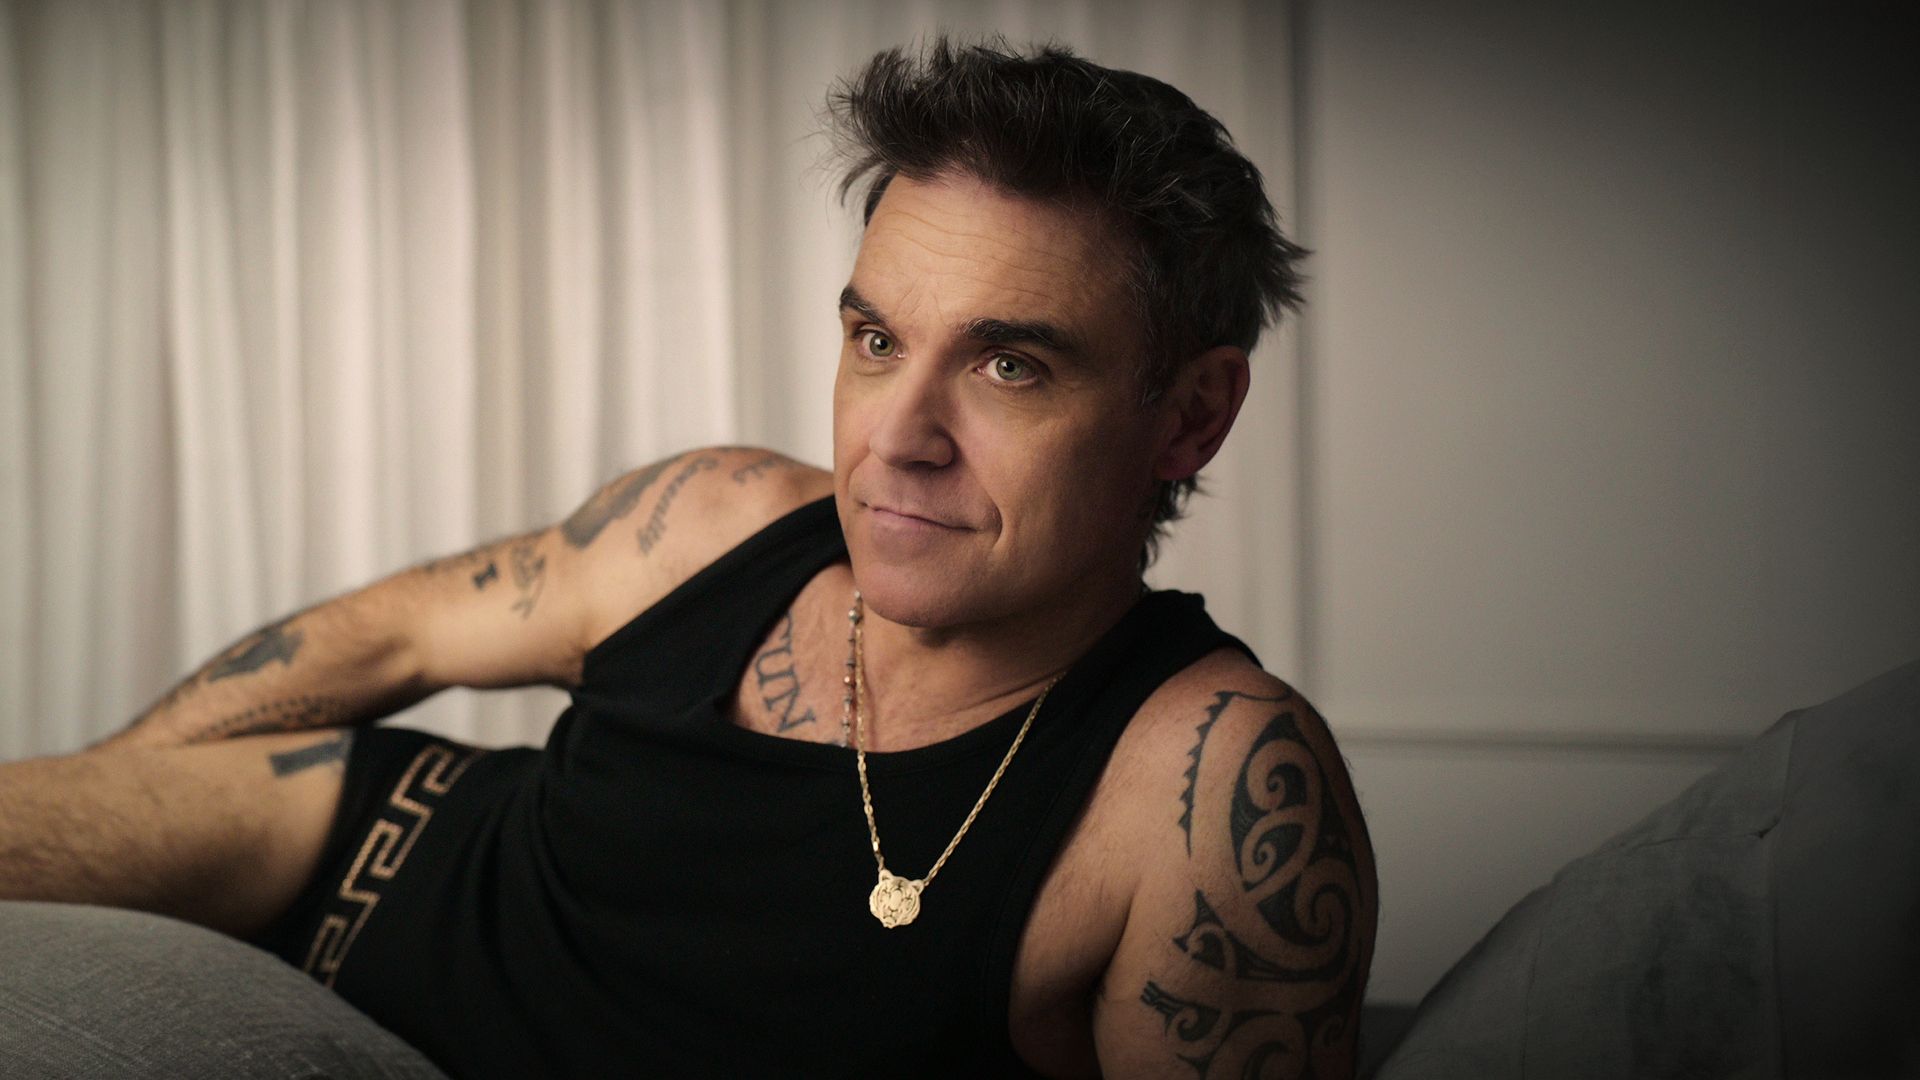 Robbie Williams tells all about his life and career in a new Netflix documentary 